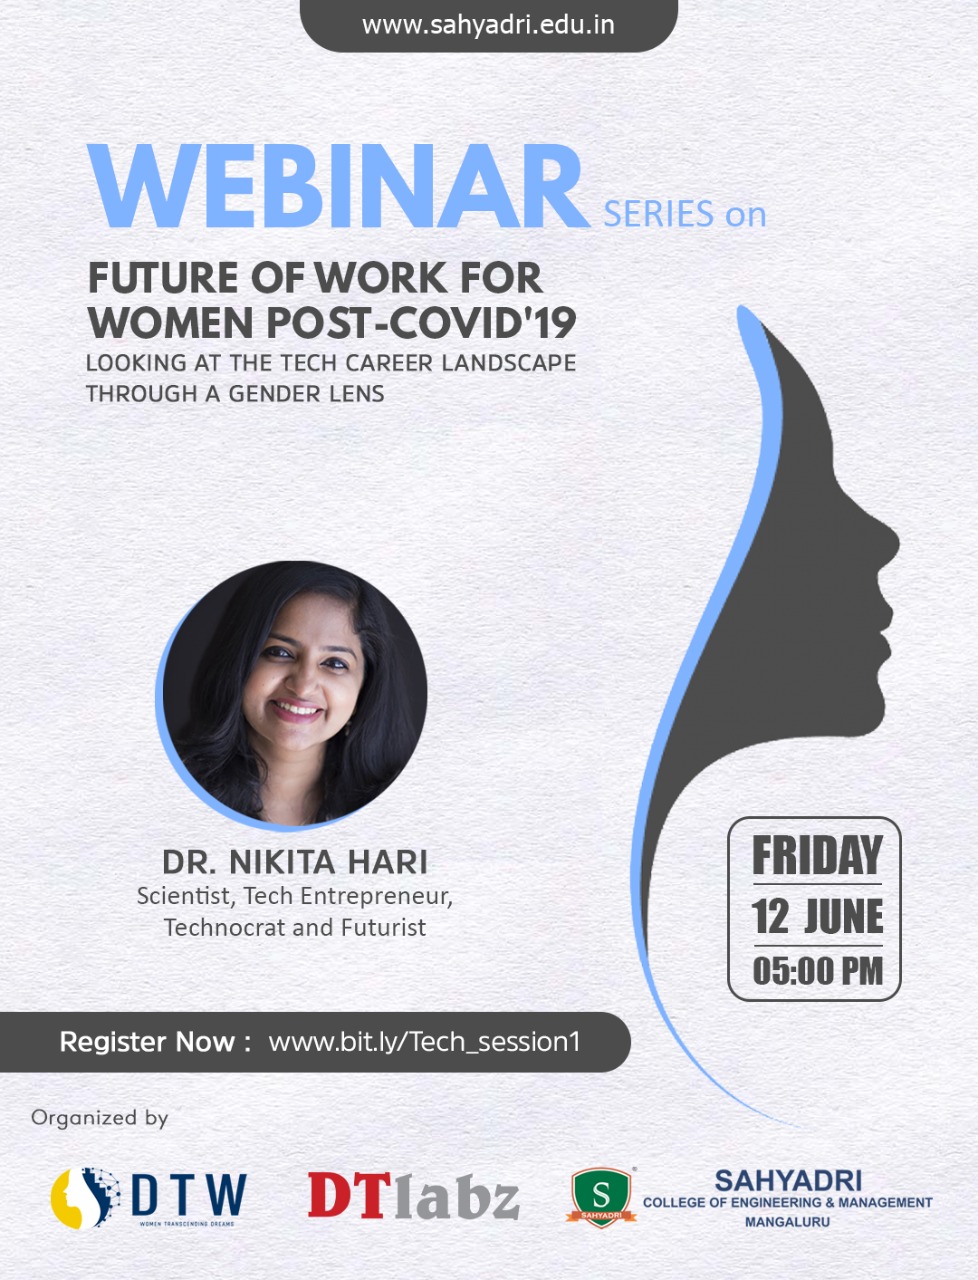 DTW an extension of DTLabz organised a Webinar on Future of Work for Women Post-COVID'19